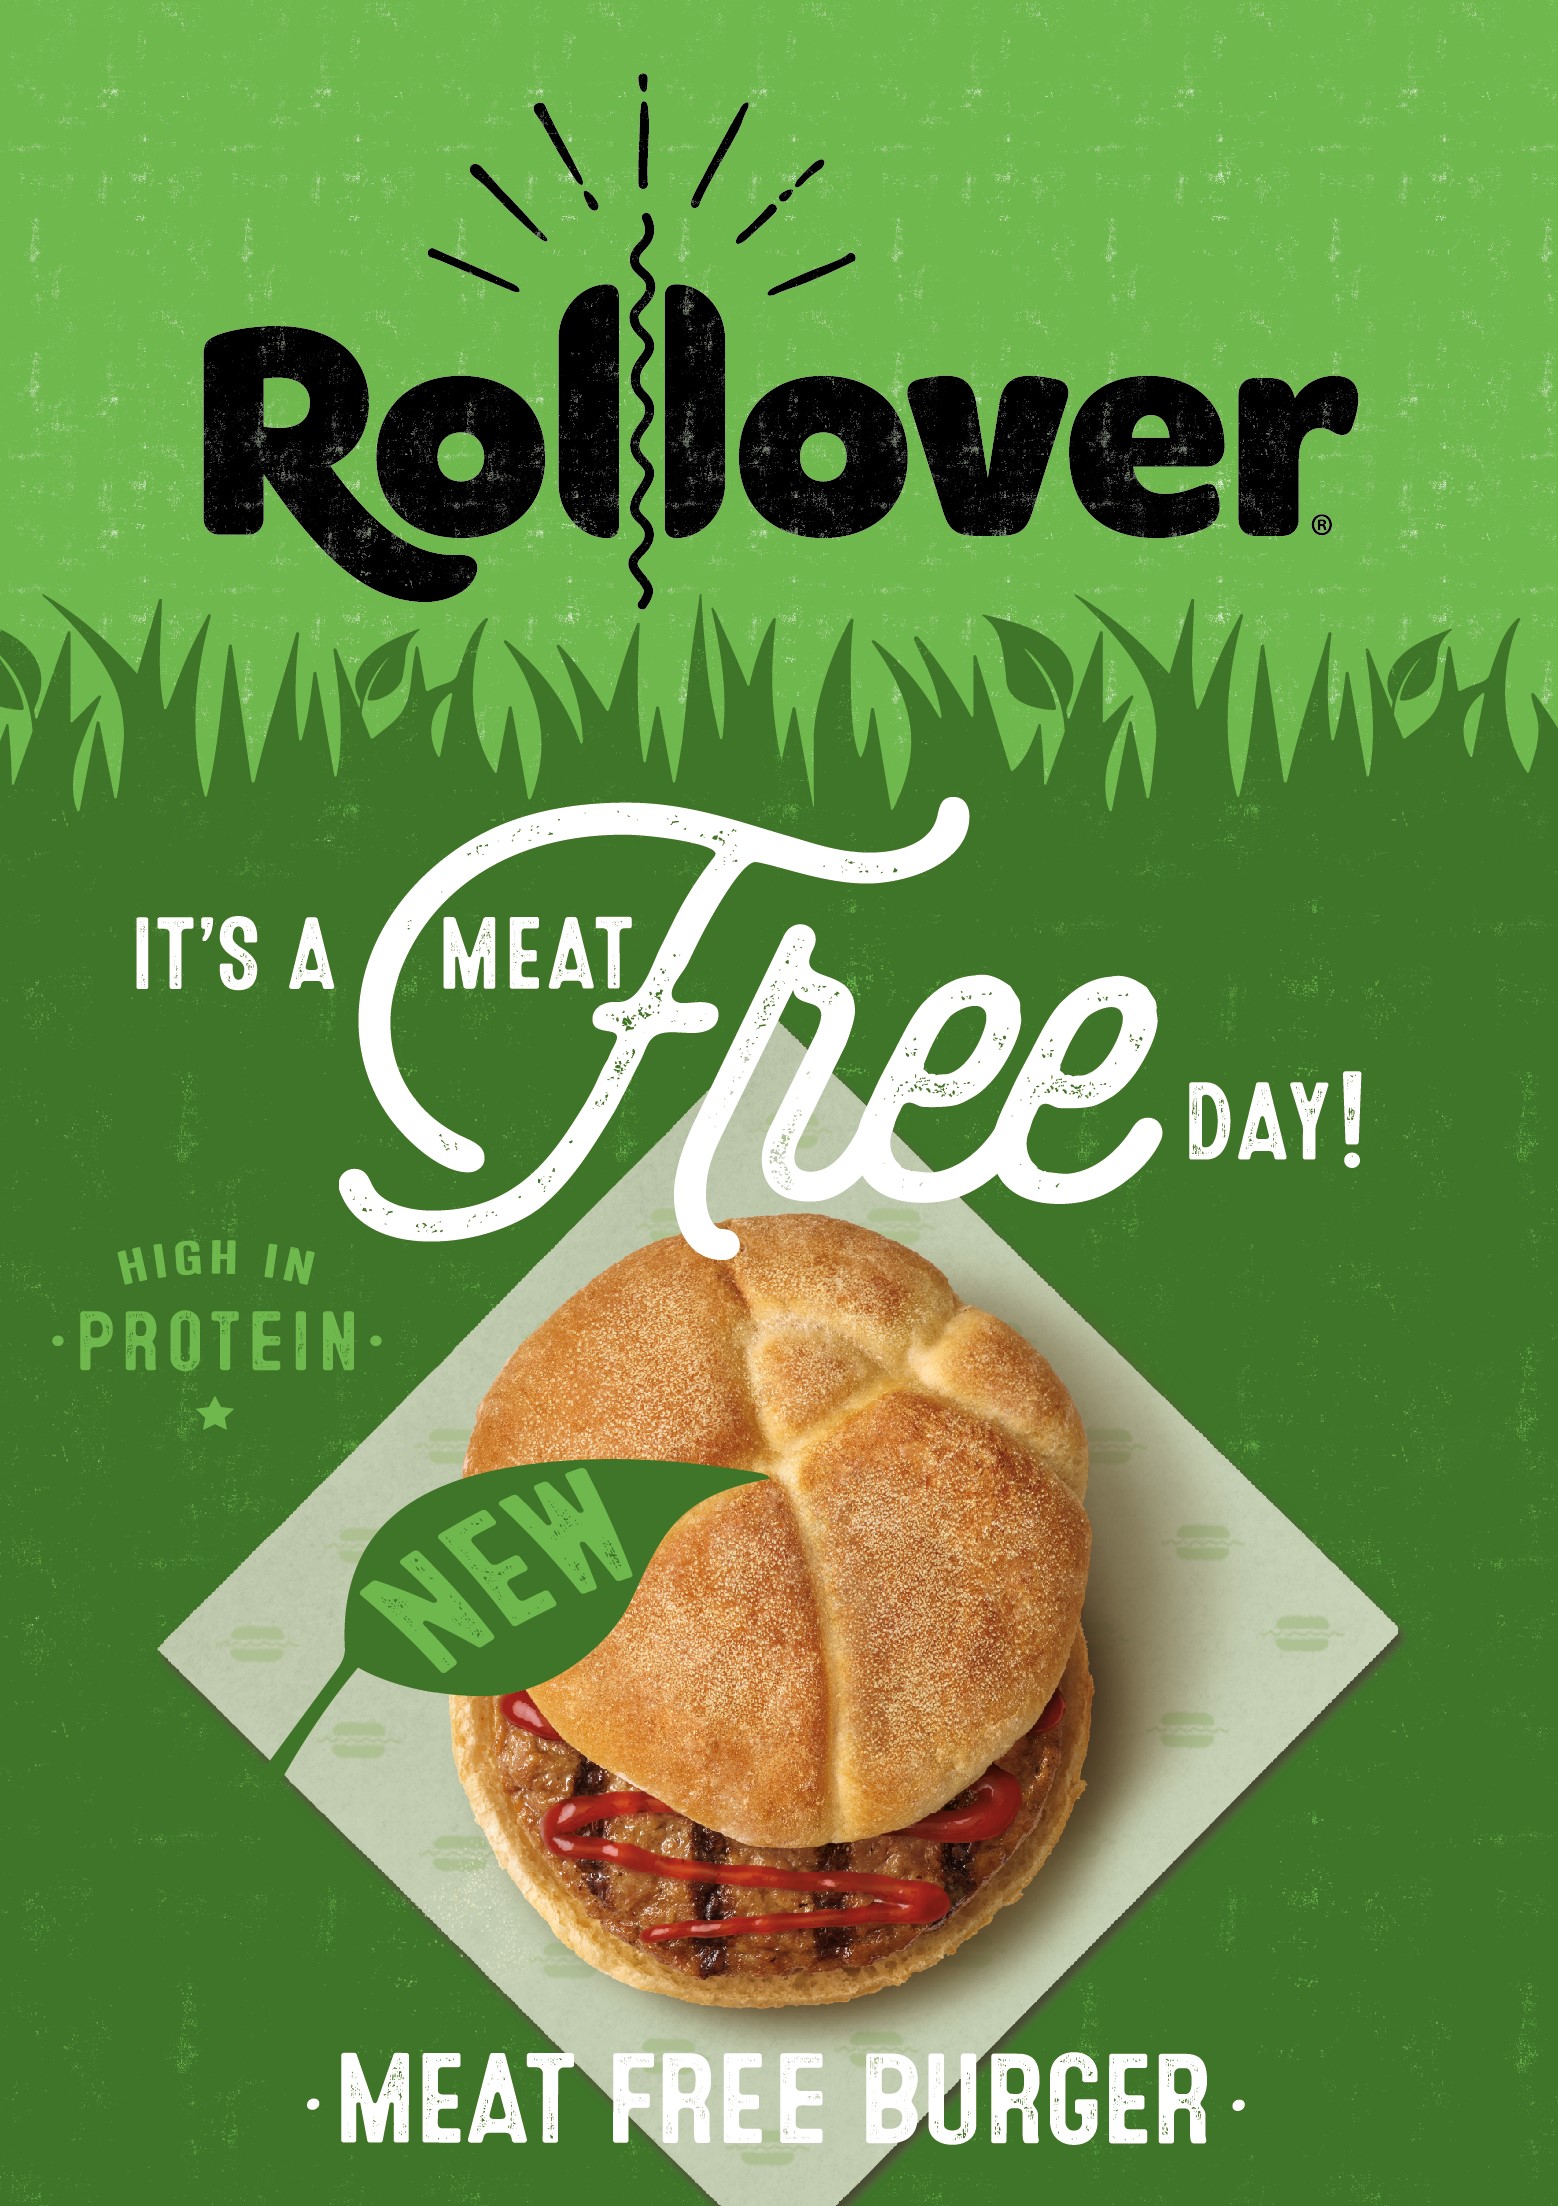 FTG Rollover brand expands offering with Meat-Free Burgers